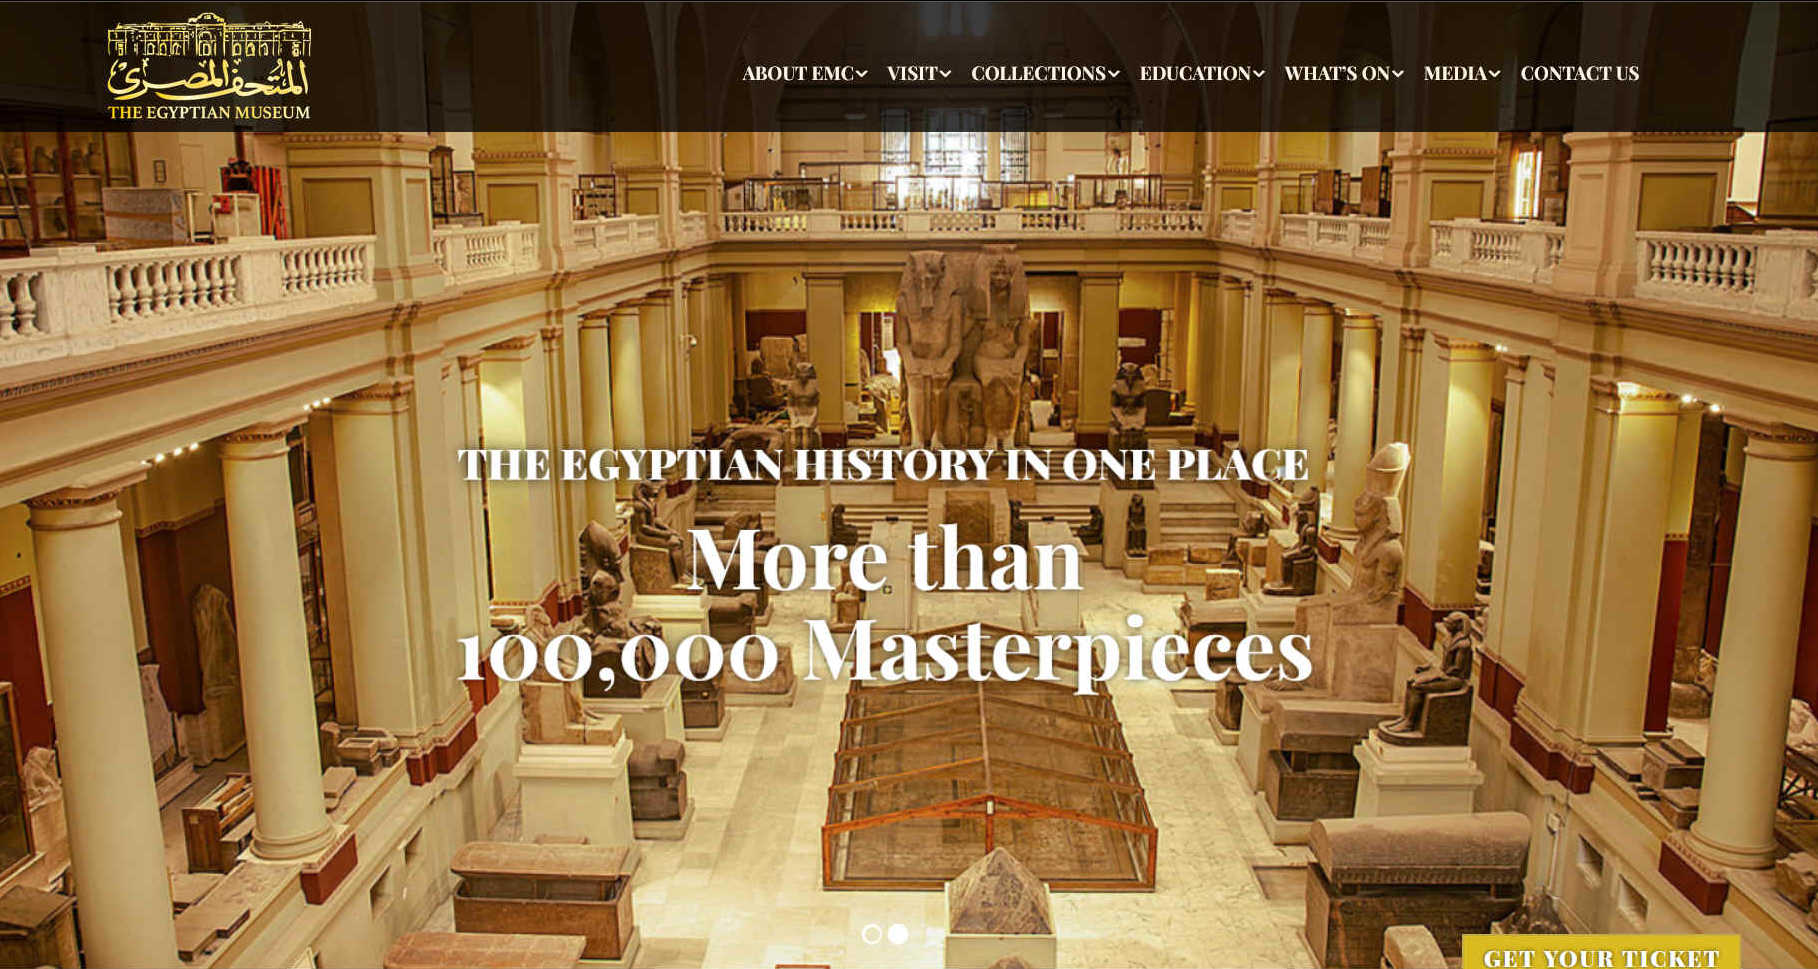 The Egyptian Museum at Cairo holds more than 100,000 masterpieces